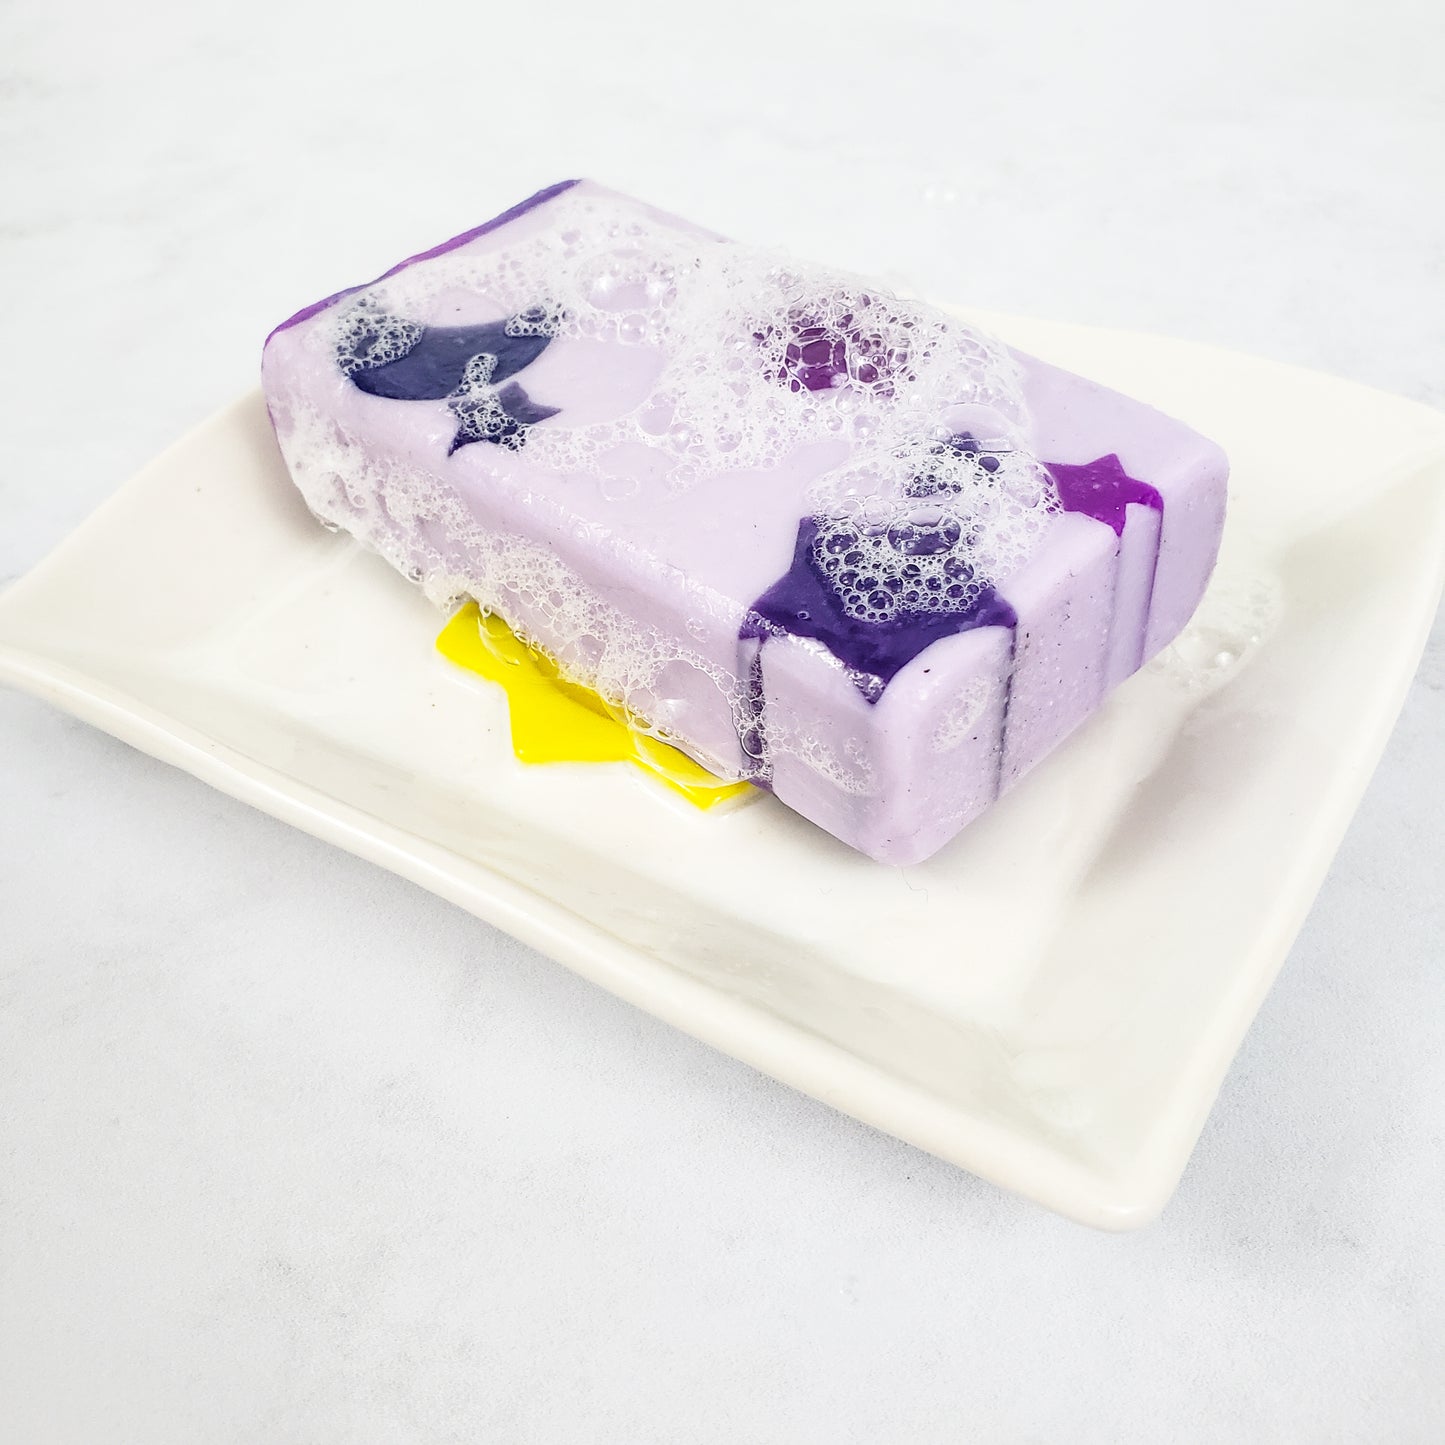 A purple soap with purple stars sitting on a white rectangular soap dish.